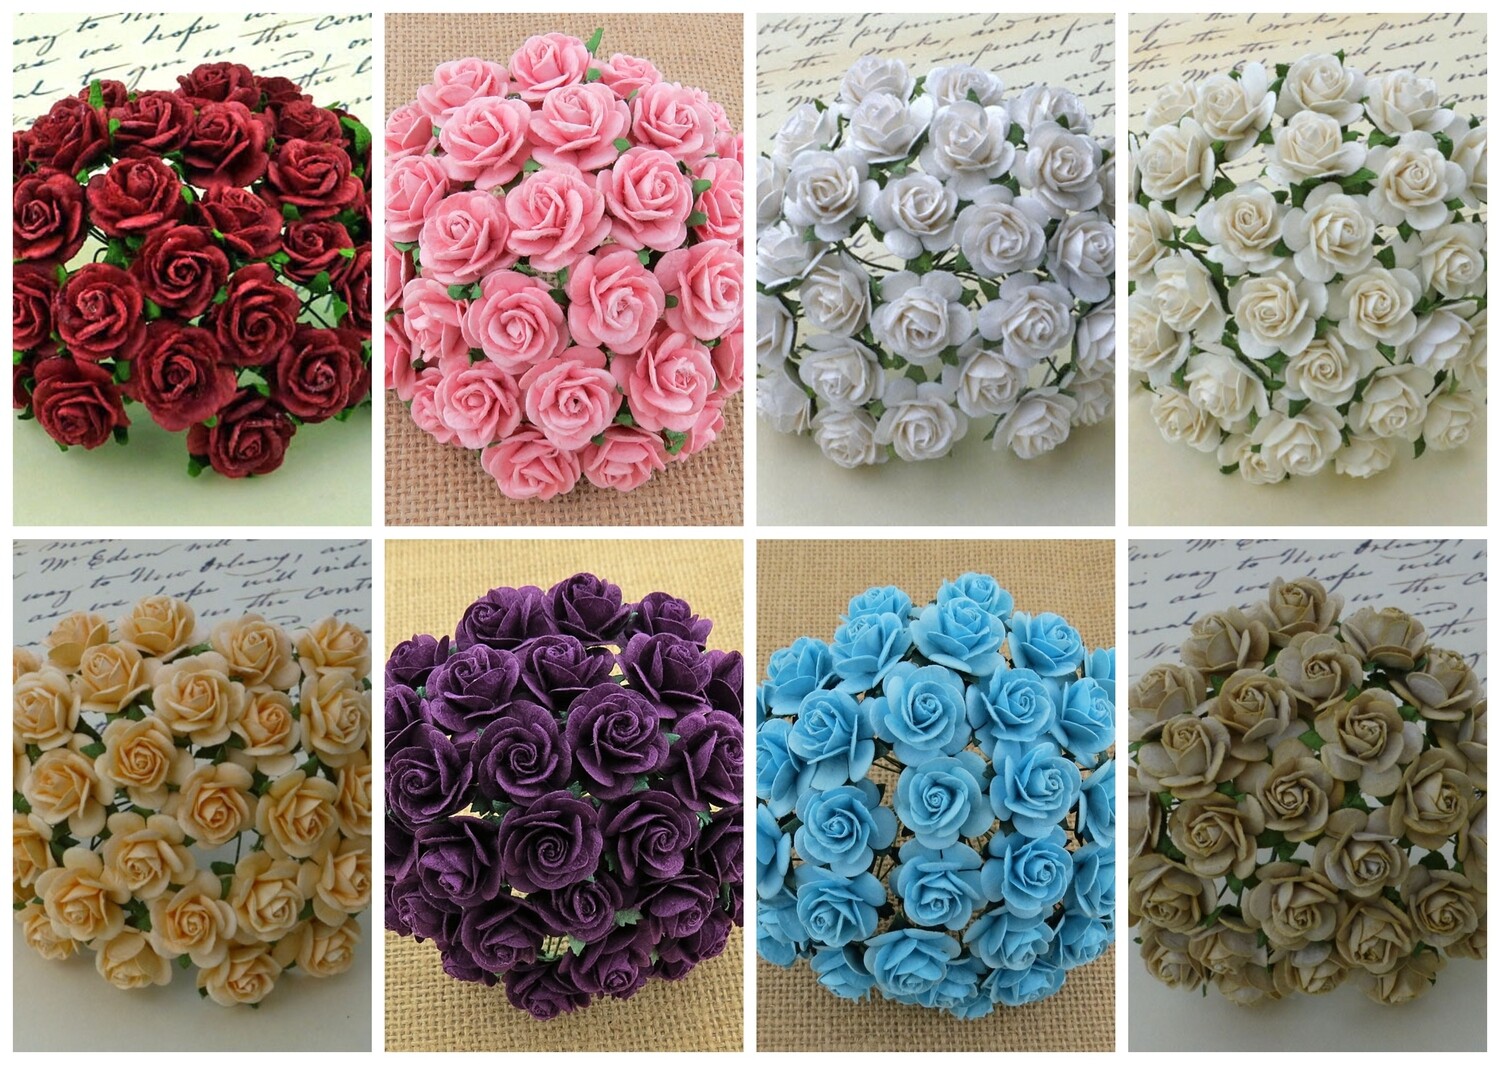 25mm Open Roses Color Set 1 - Promlee Flowers